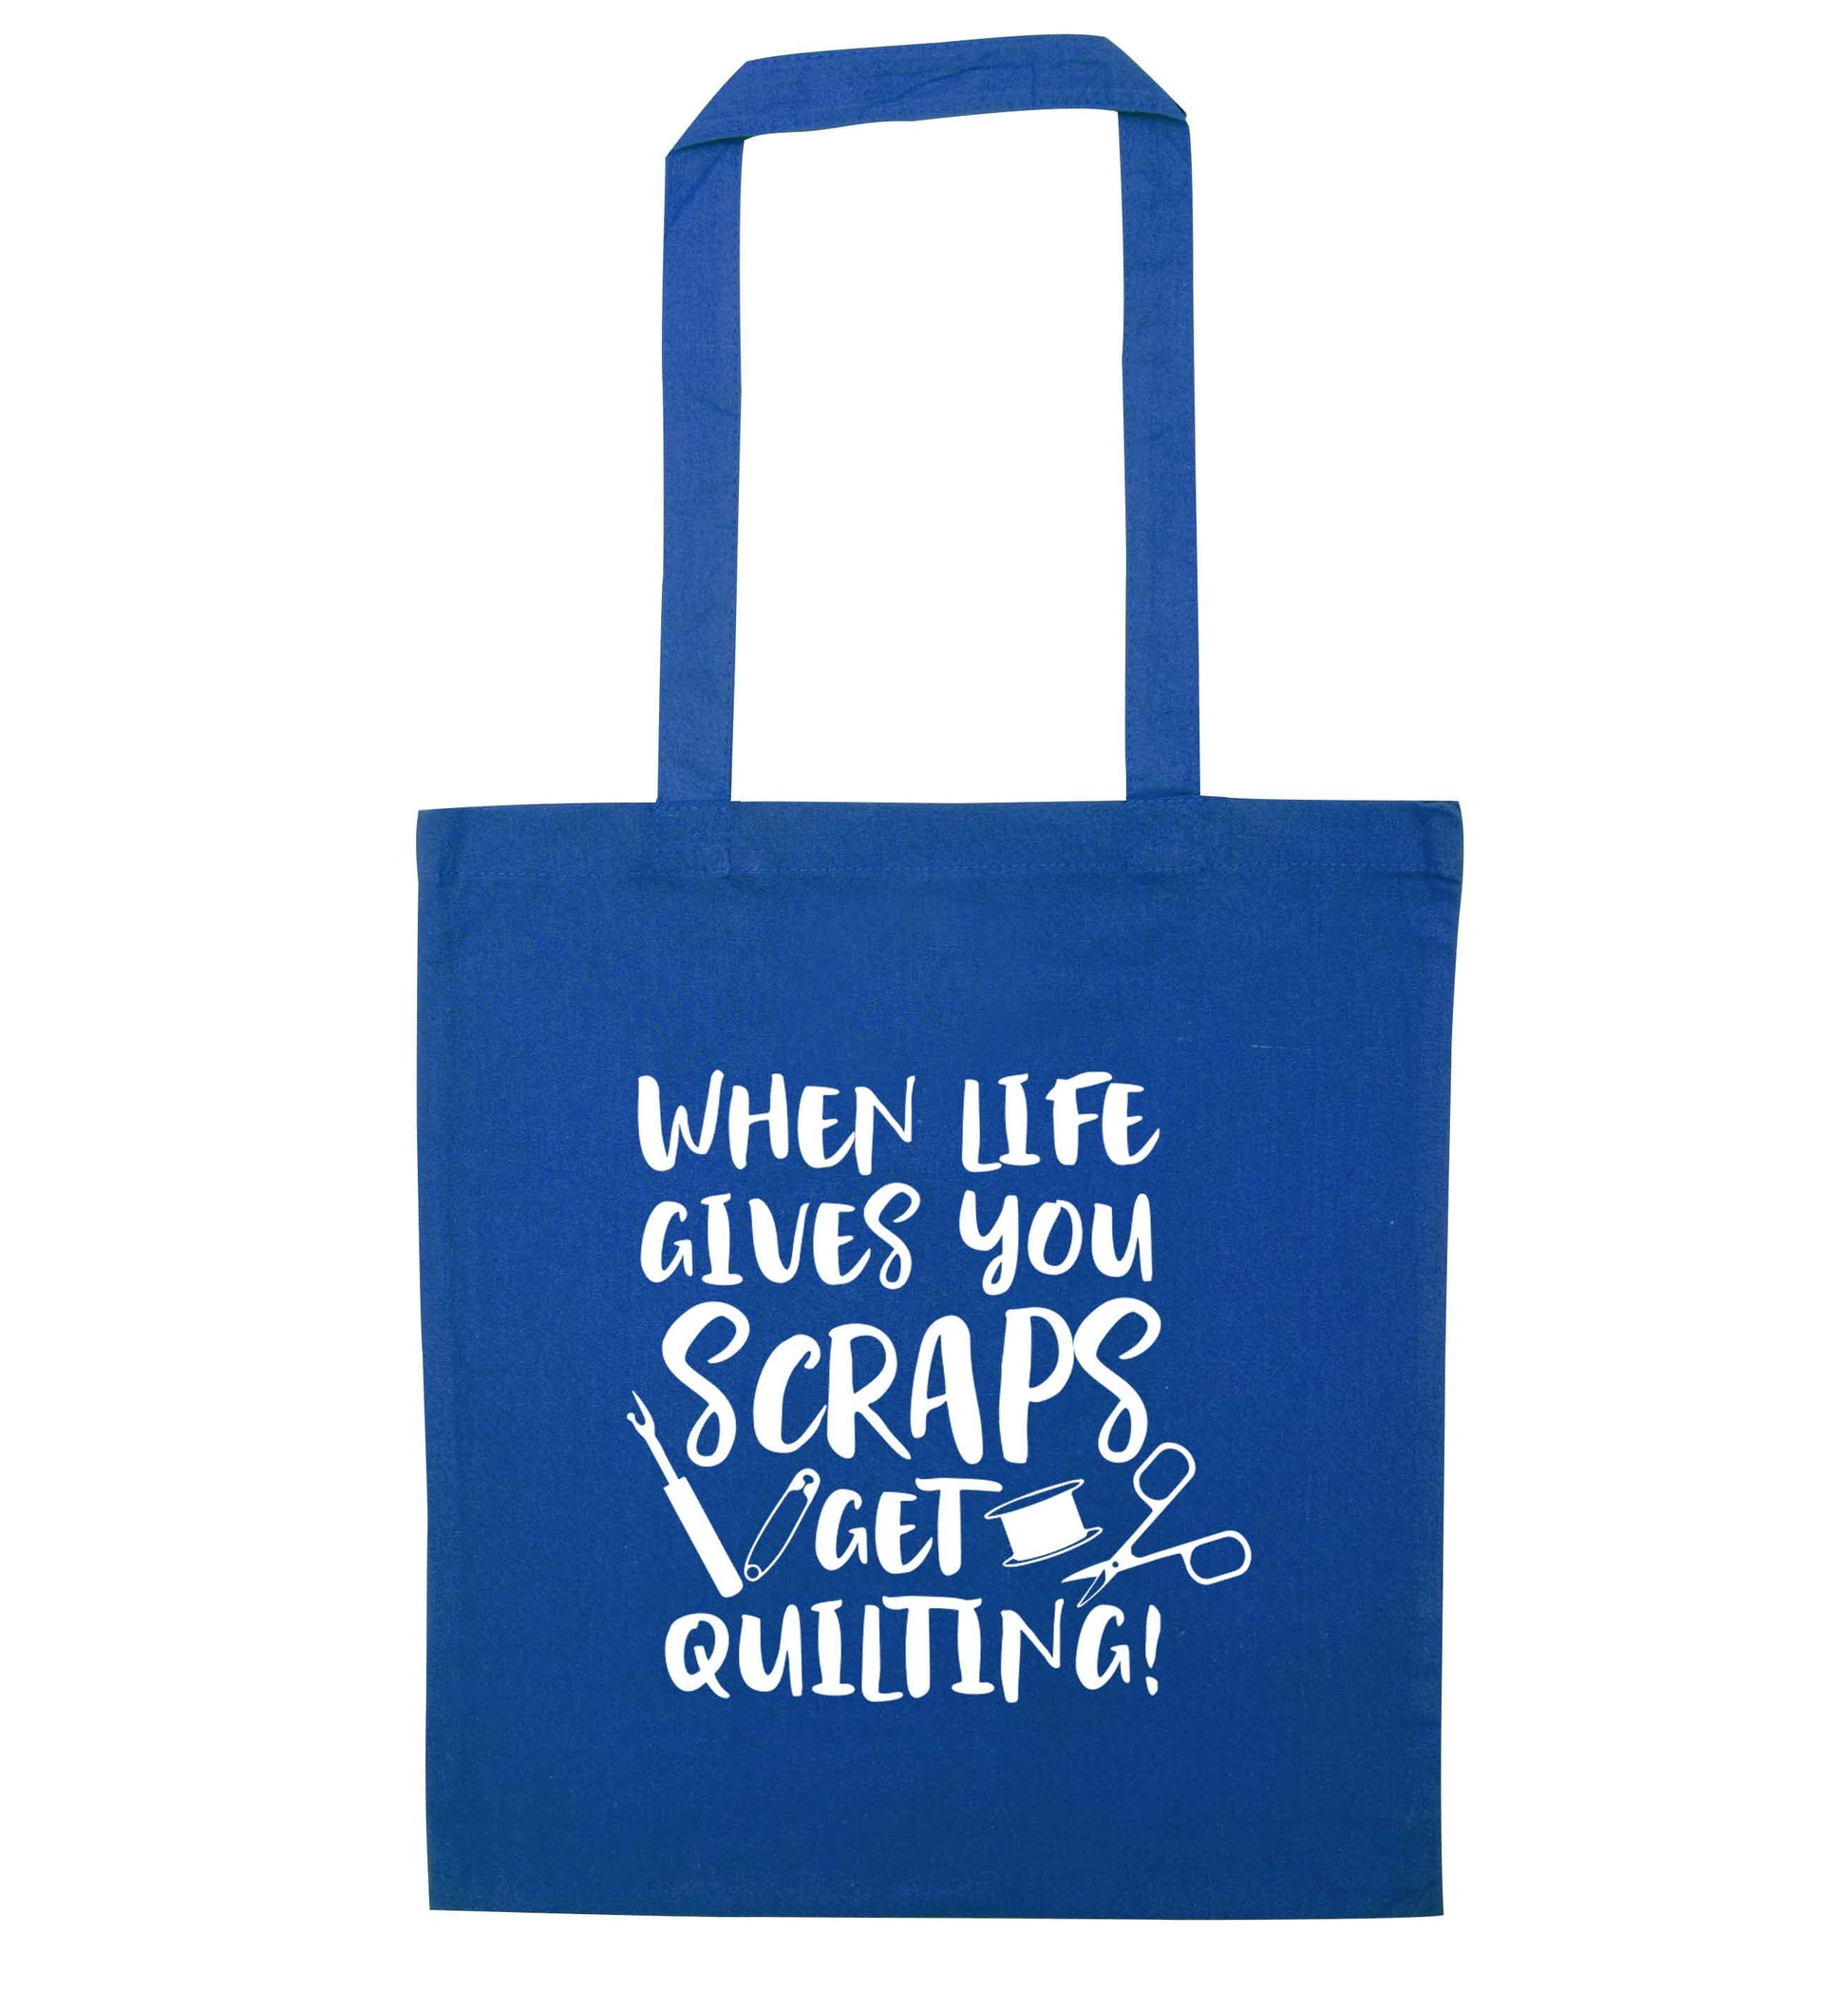 When life gives you scraps get quilting! blue tote bag